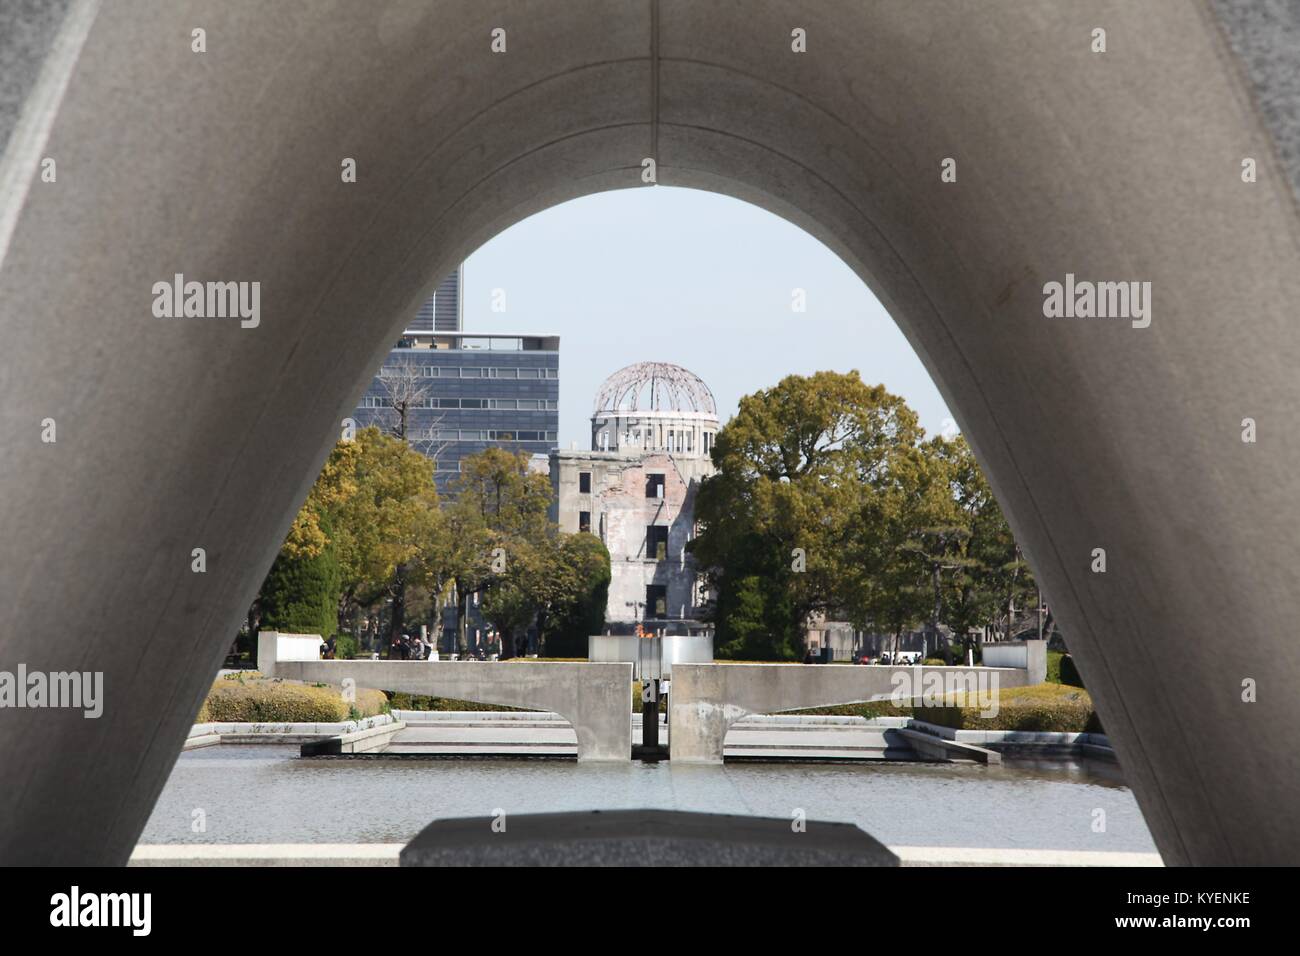 View through memorial statue at the Hiroshima Peace Memorial, part of the Hiroshima Peace Memorial Park, commemorating those who died in the atomic bombing of the city, Hiroshima, Japan, March 12, 2014. () Stock Photo